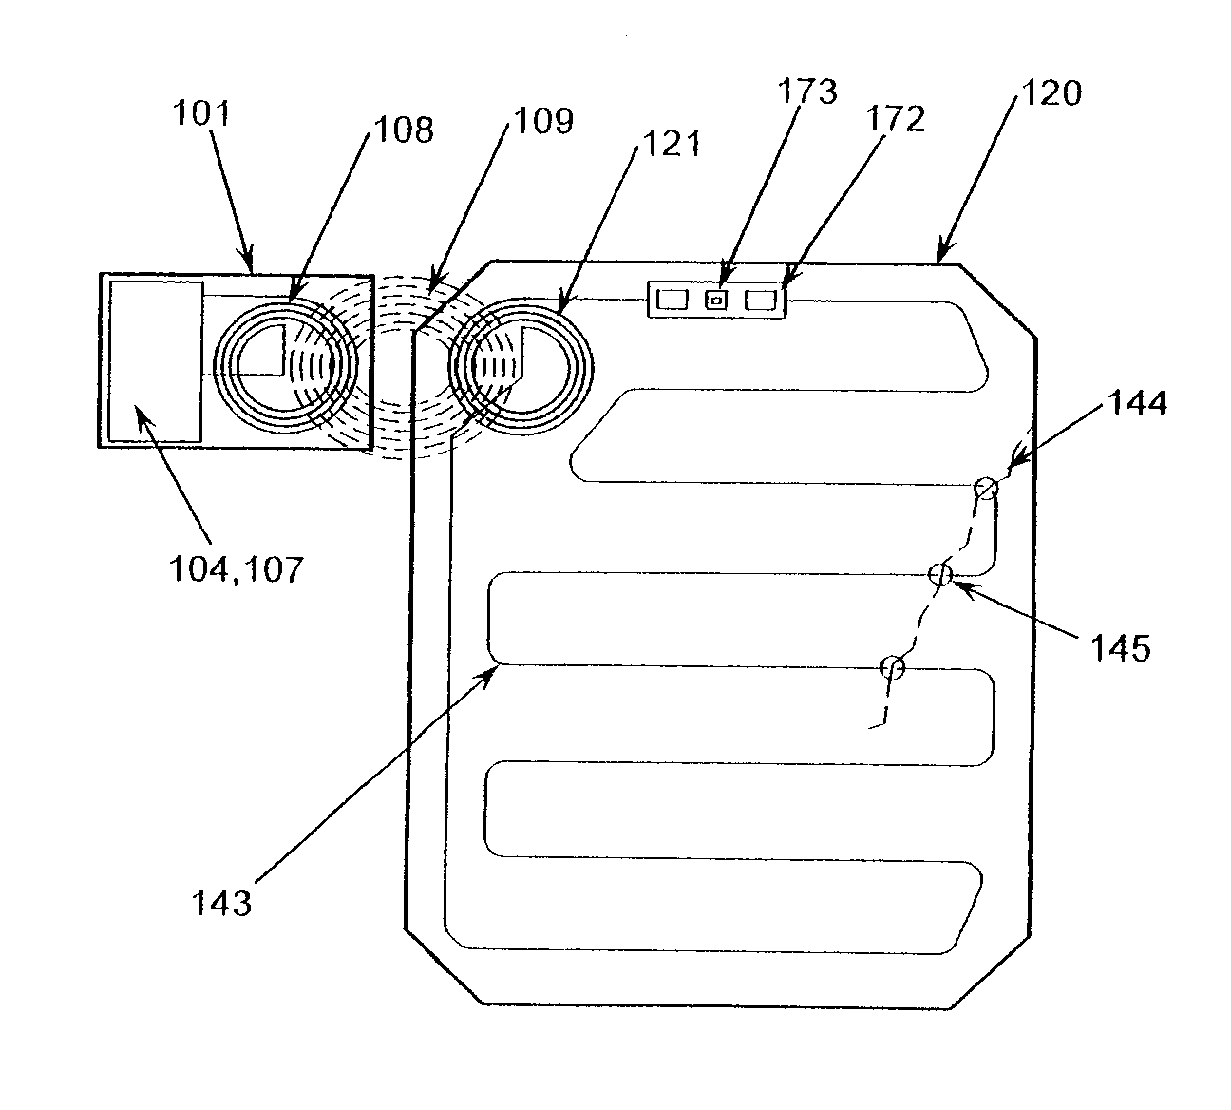 Wireless method and apparatus for detecting damage in ceramic body armor